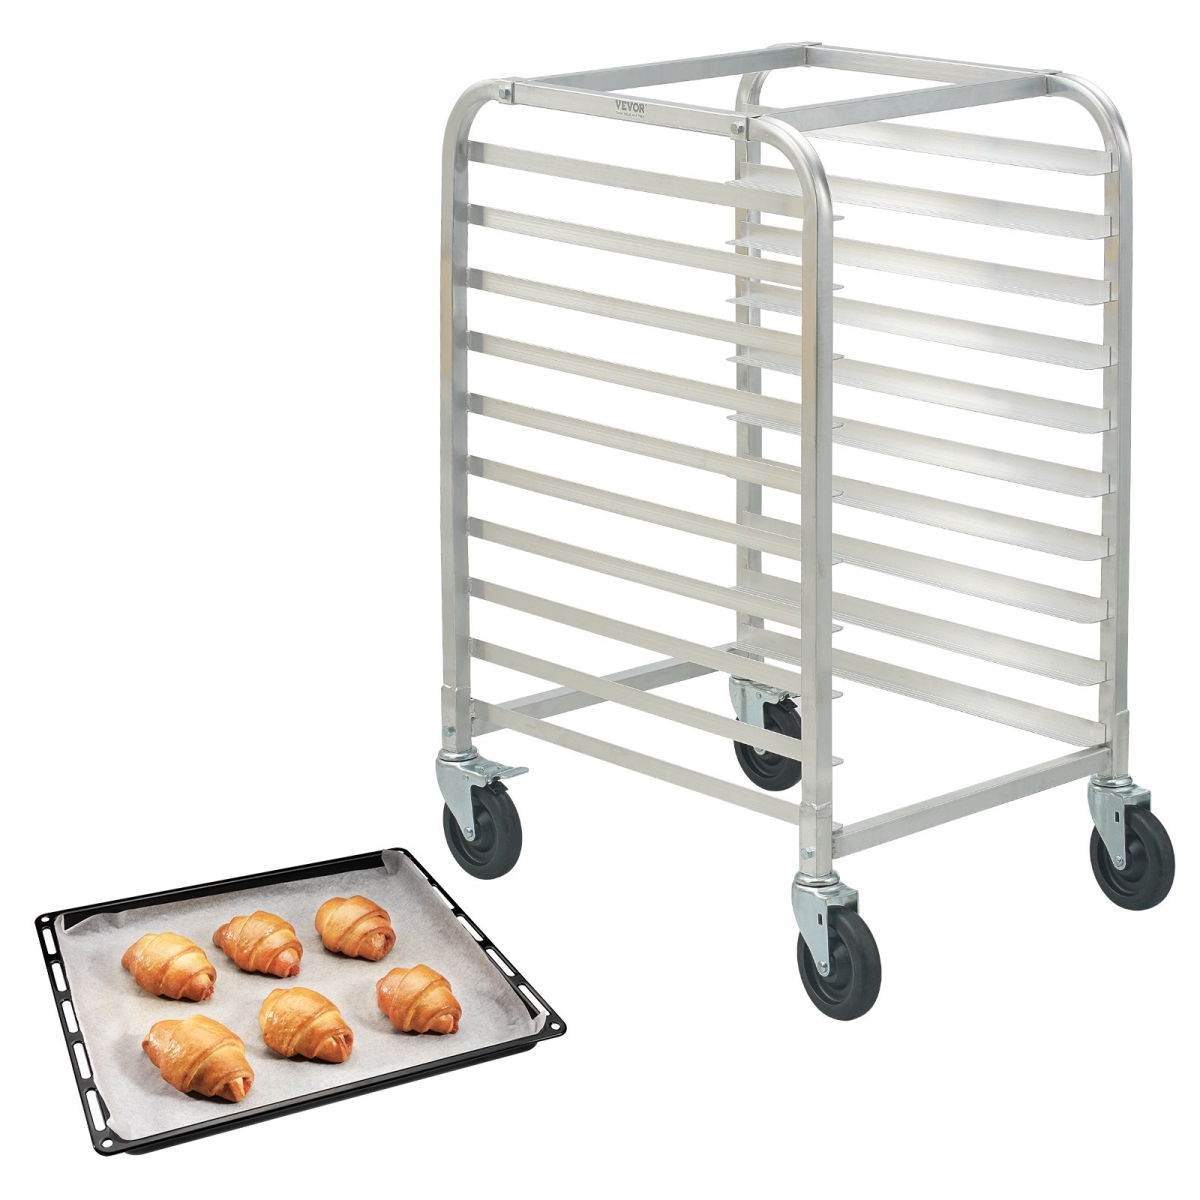 Picture of Vevor MBPJLZCCHC1058T4RV0 26 x 20.3 x 39 in. 10-Tier Commercial Bakery Racks with Brake Wheels